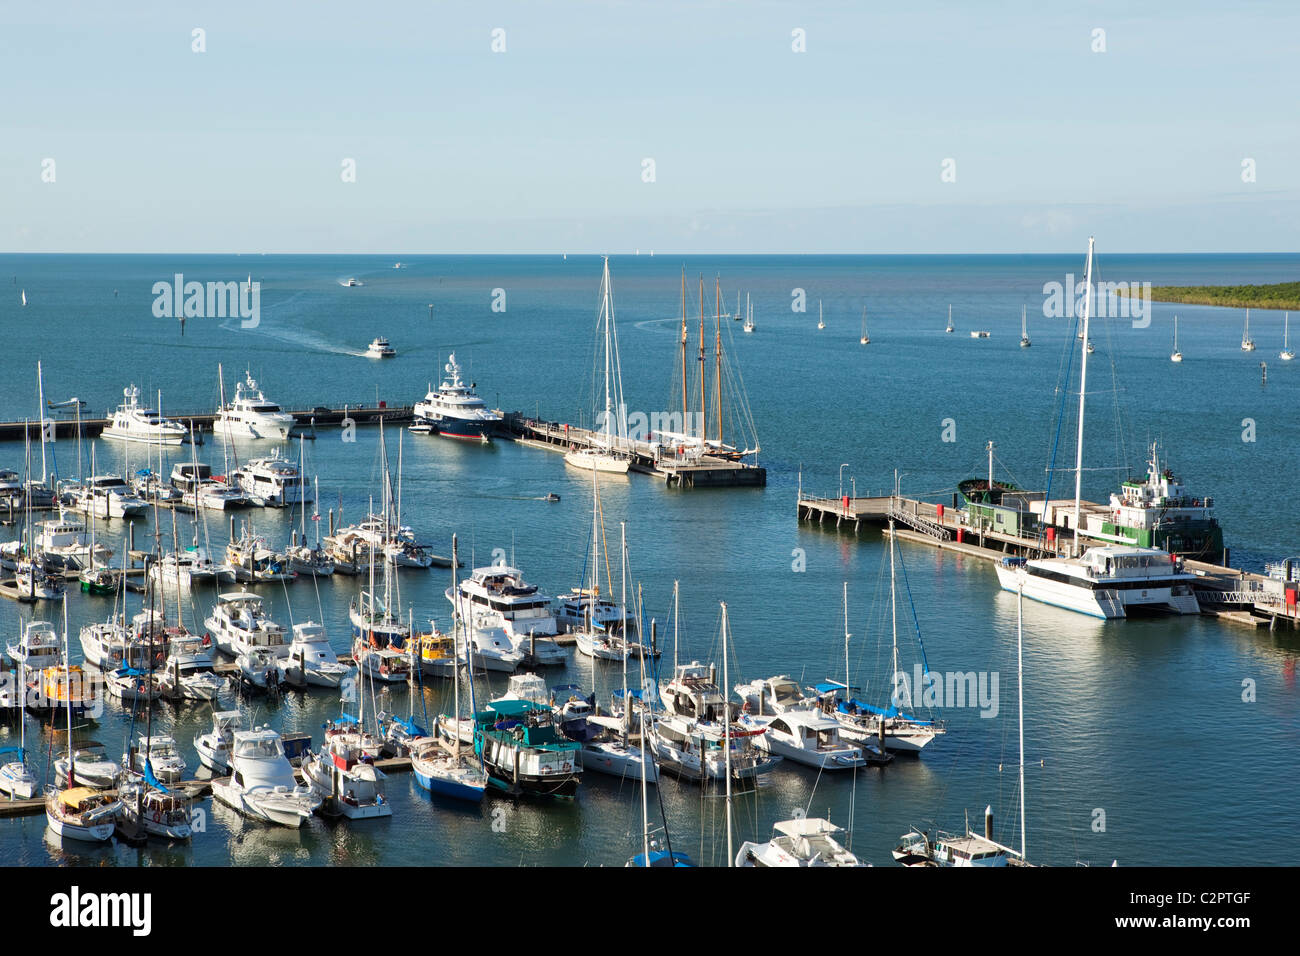 View of the Marlin Marina and Trinity Inlet. Cairns, Queensland, Australia Stock Photo